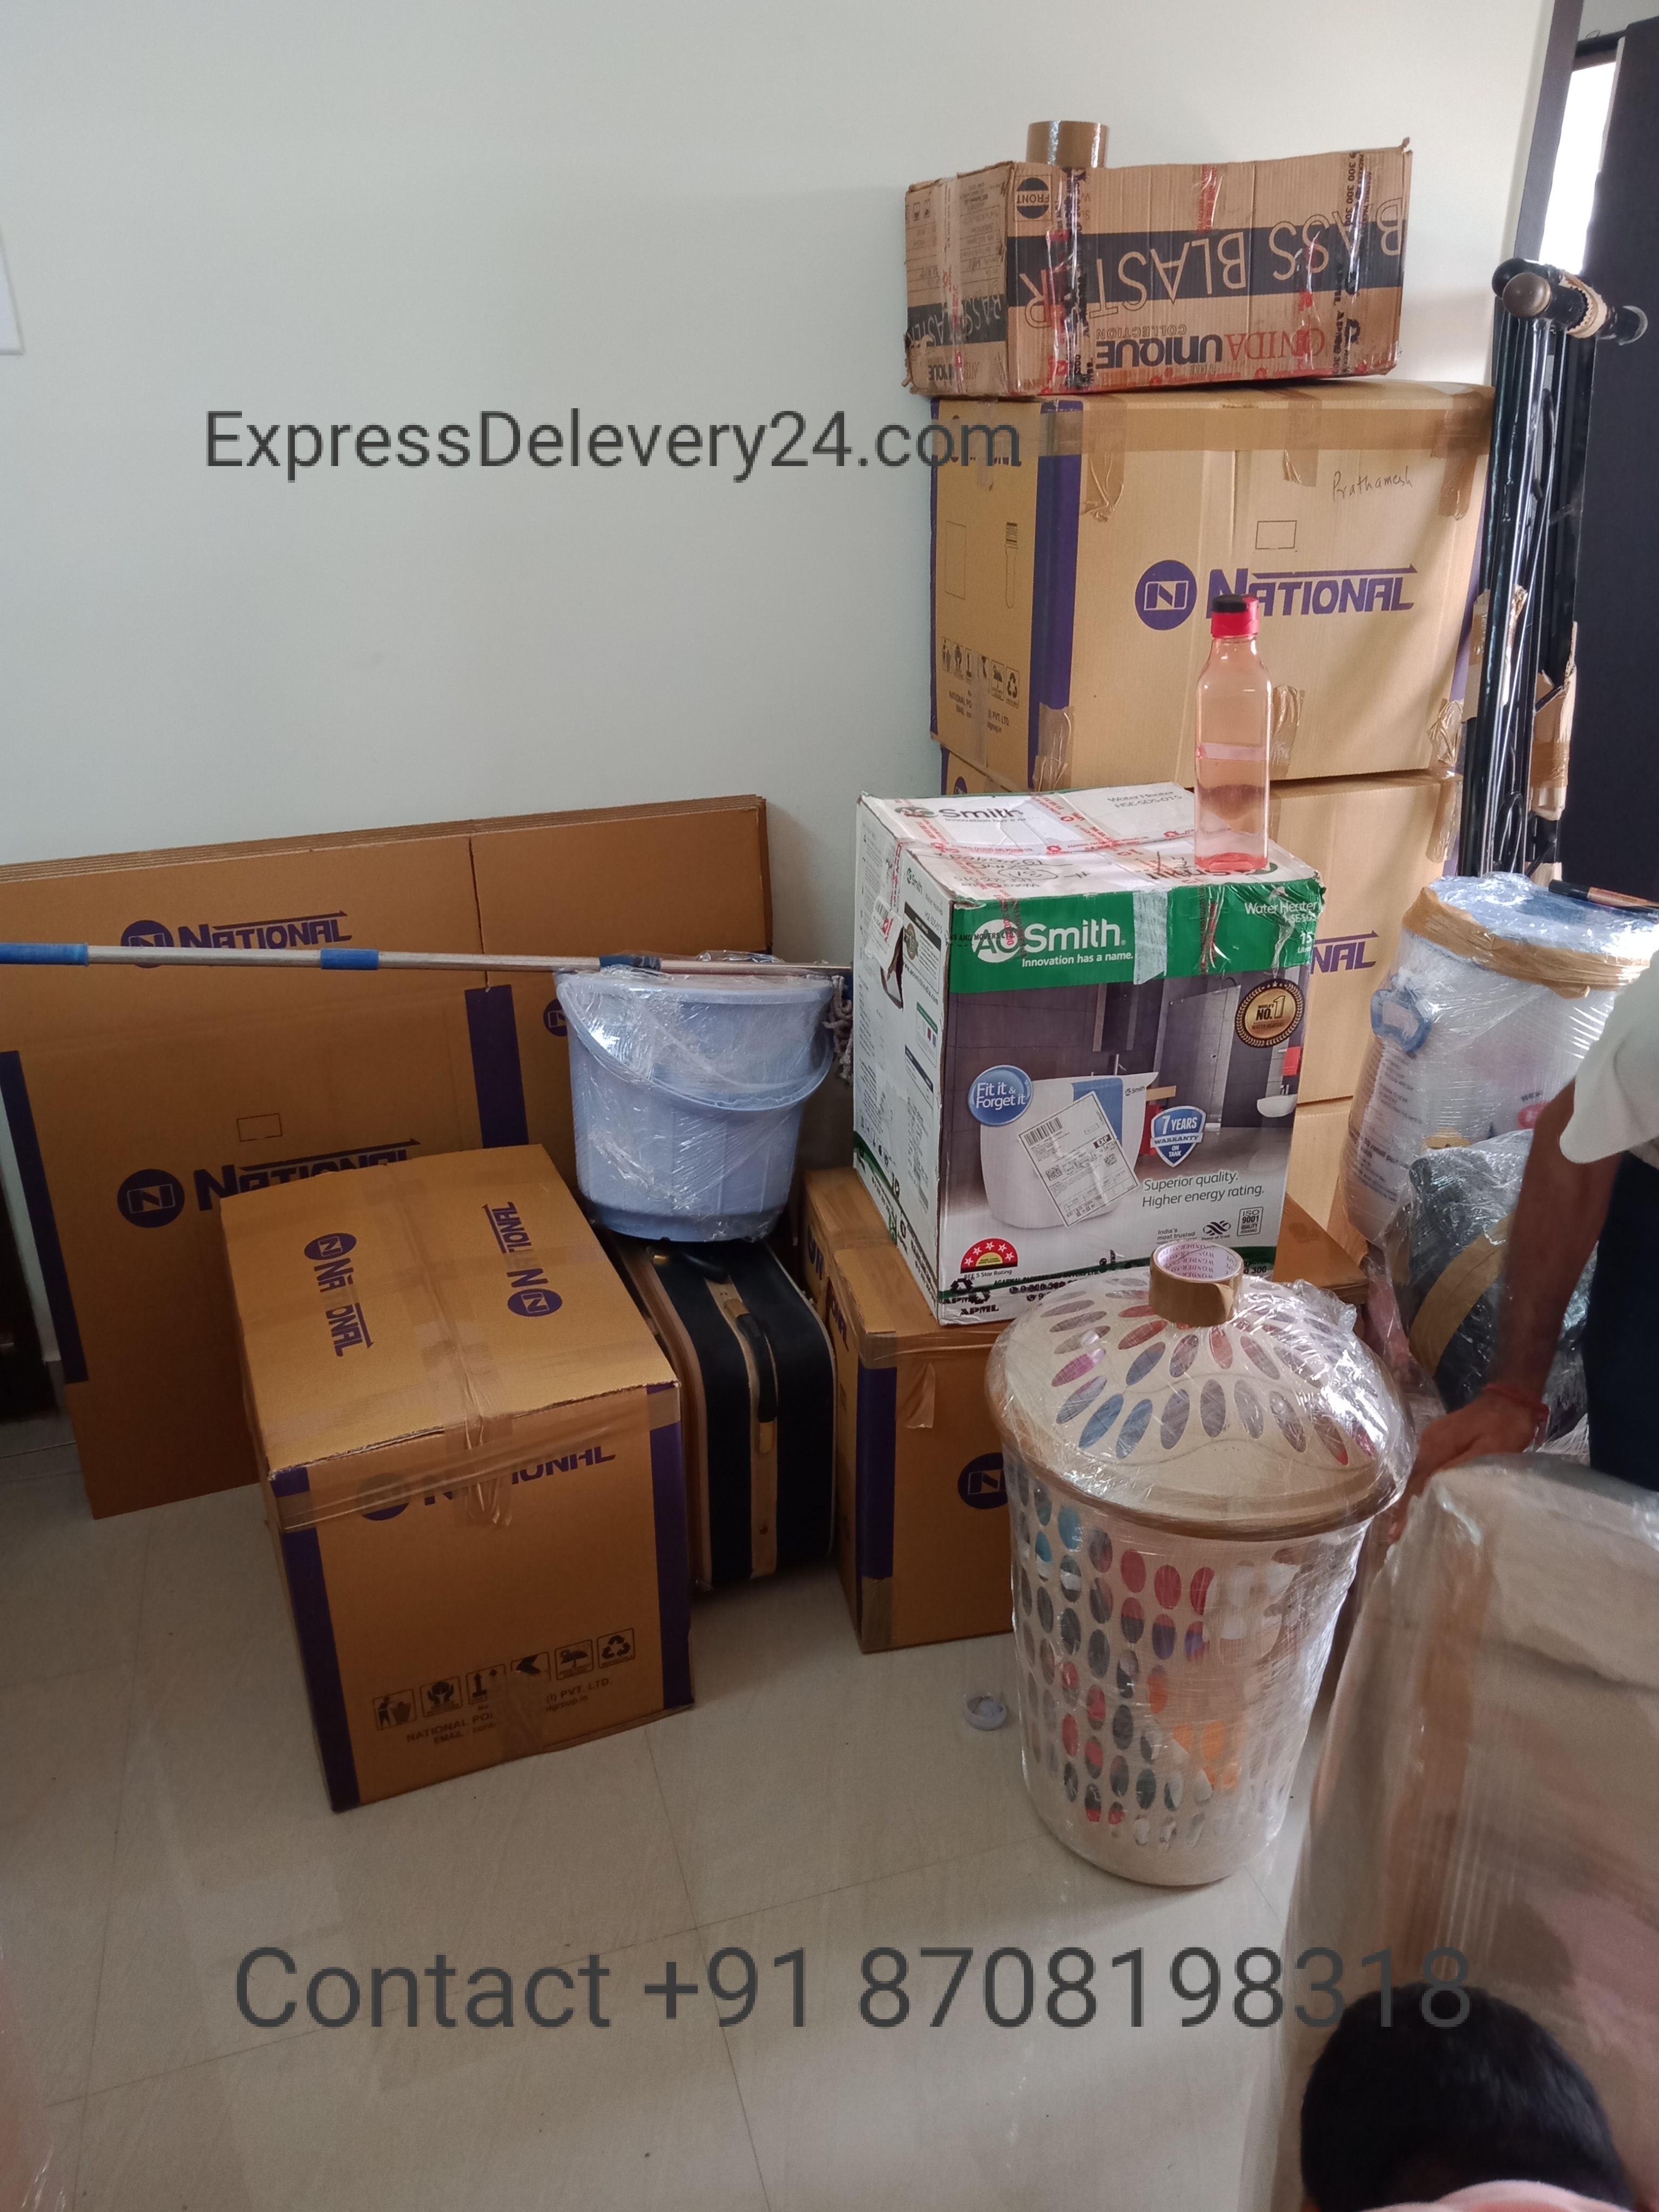 Packers and Movers Virudhunagar 8708198318 - Get free Quote - Agarwal Packers and Movers Virudhunagar